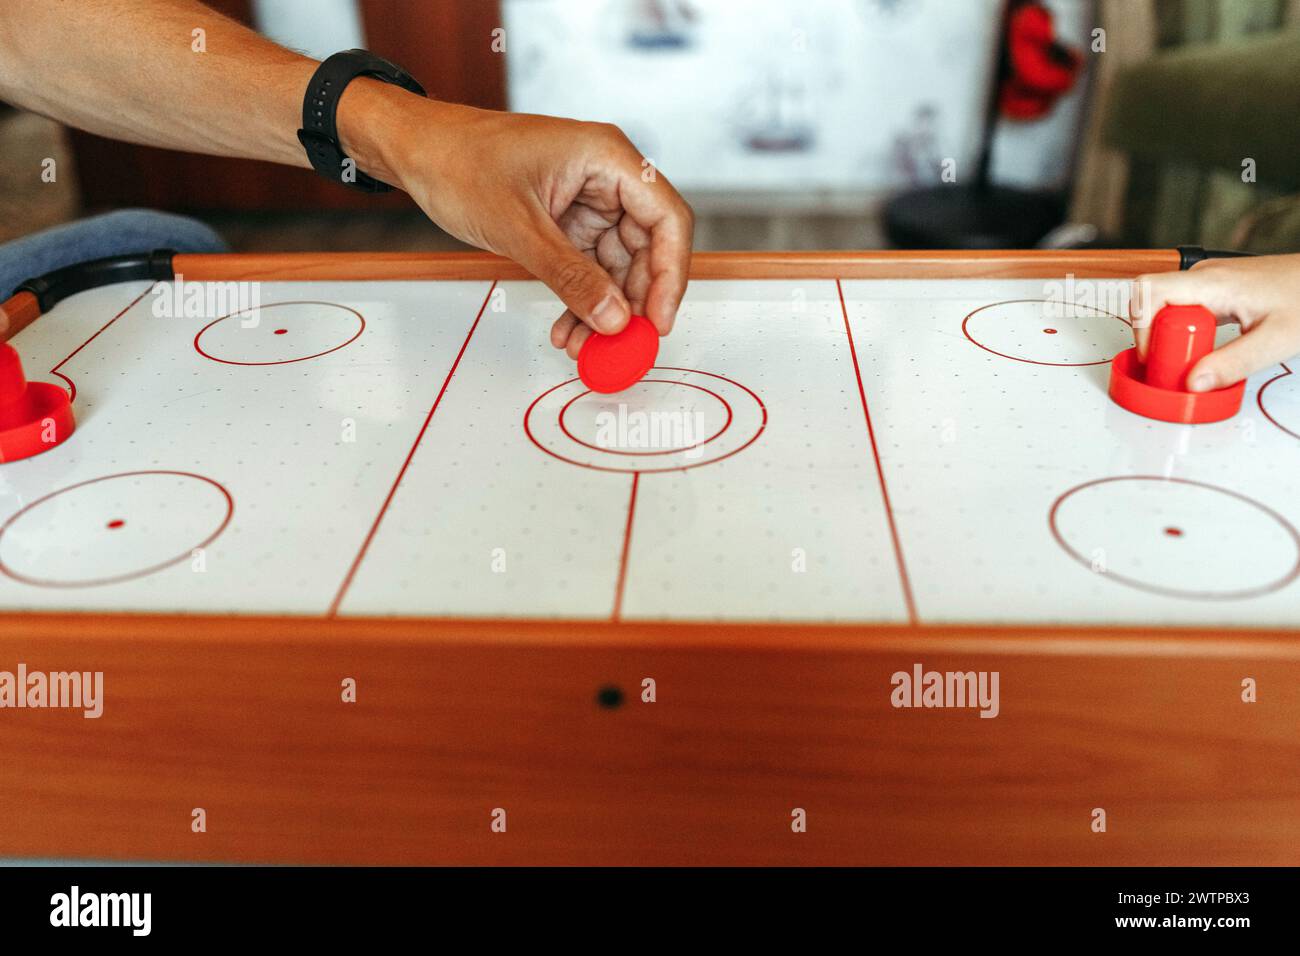 Two individuals engaged in a game of air hockey, skillfully striking the puck with paddles on a smooth table surface. Stock Photo